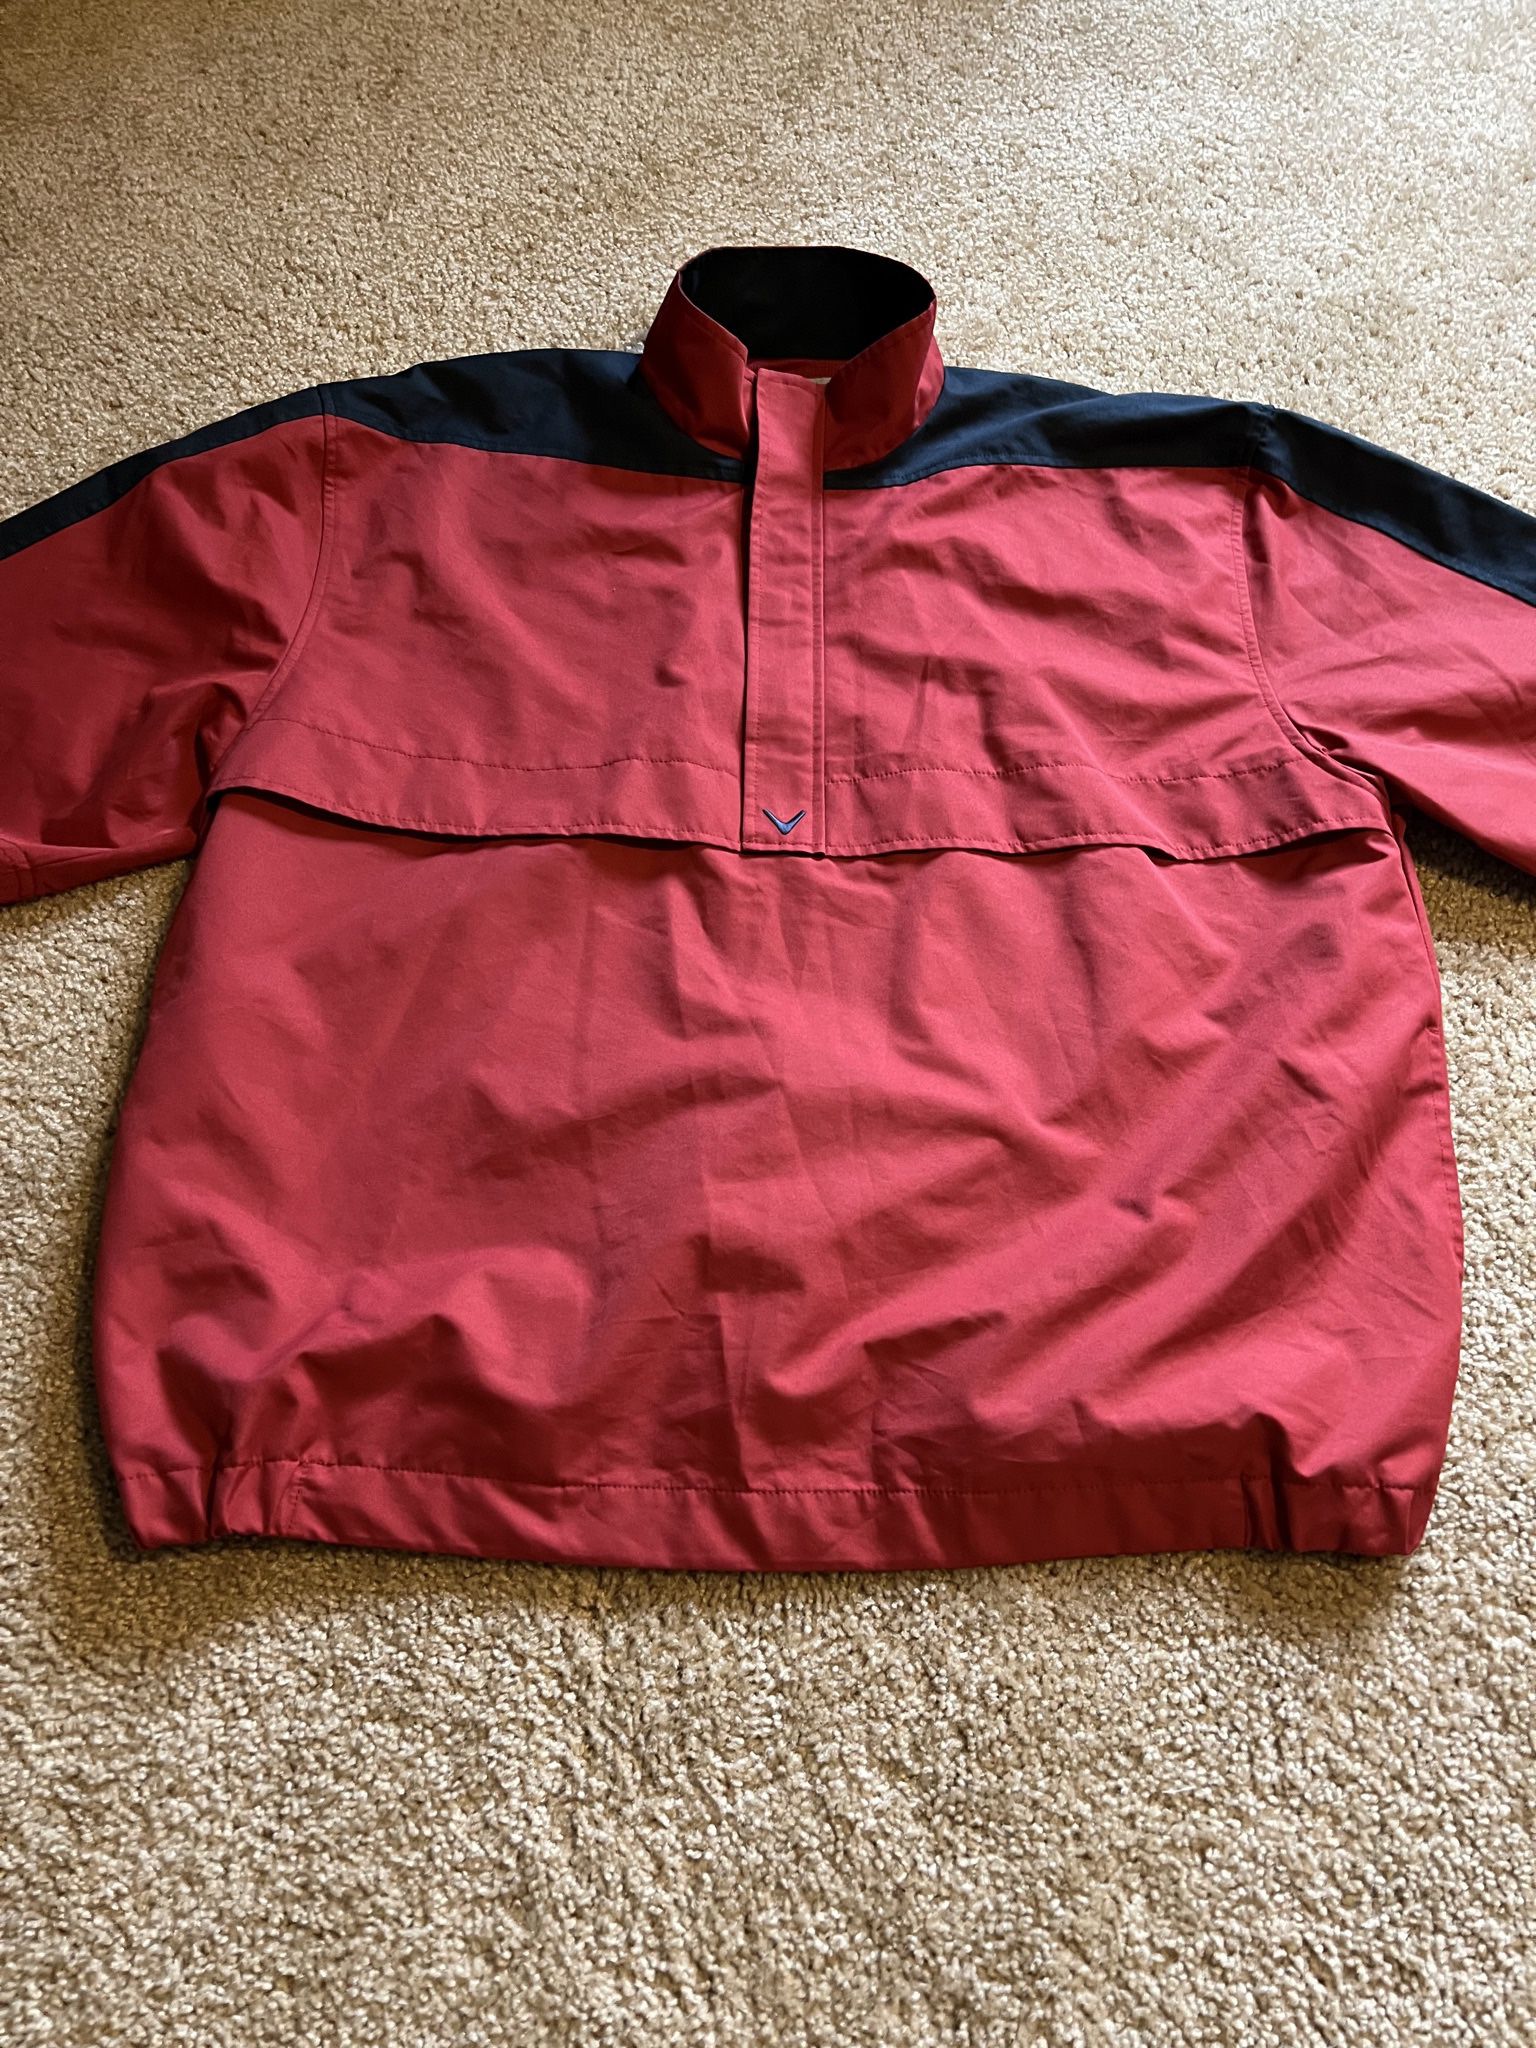 CALLAWAY / Golf Pullover WATERPROOF Coat ATHLETIC Jacket / SIZE: Mens X-Large XL / New w/o Tags!! / Red and Navy